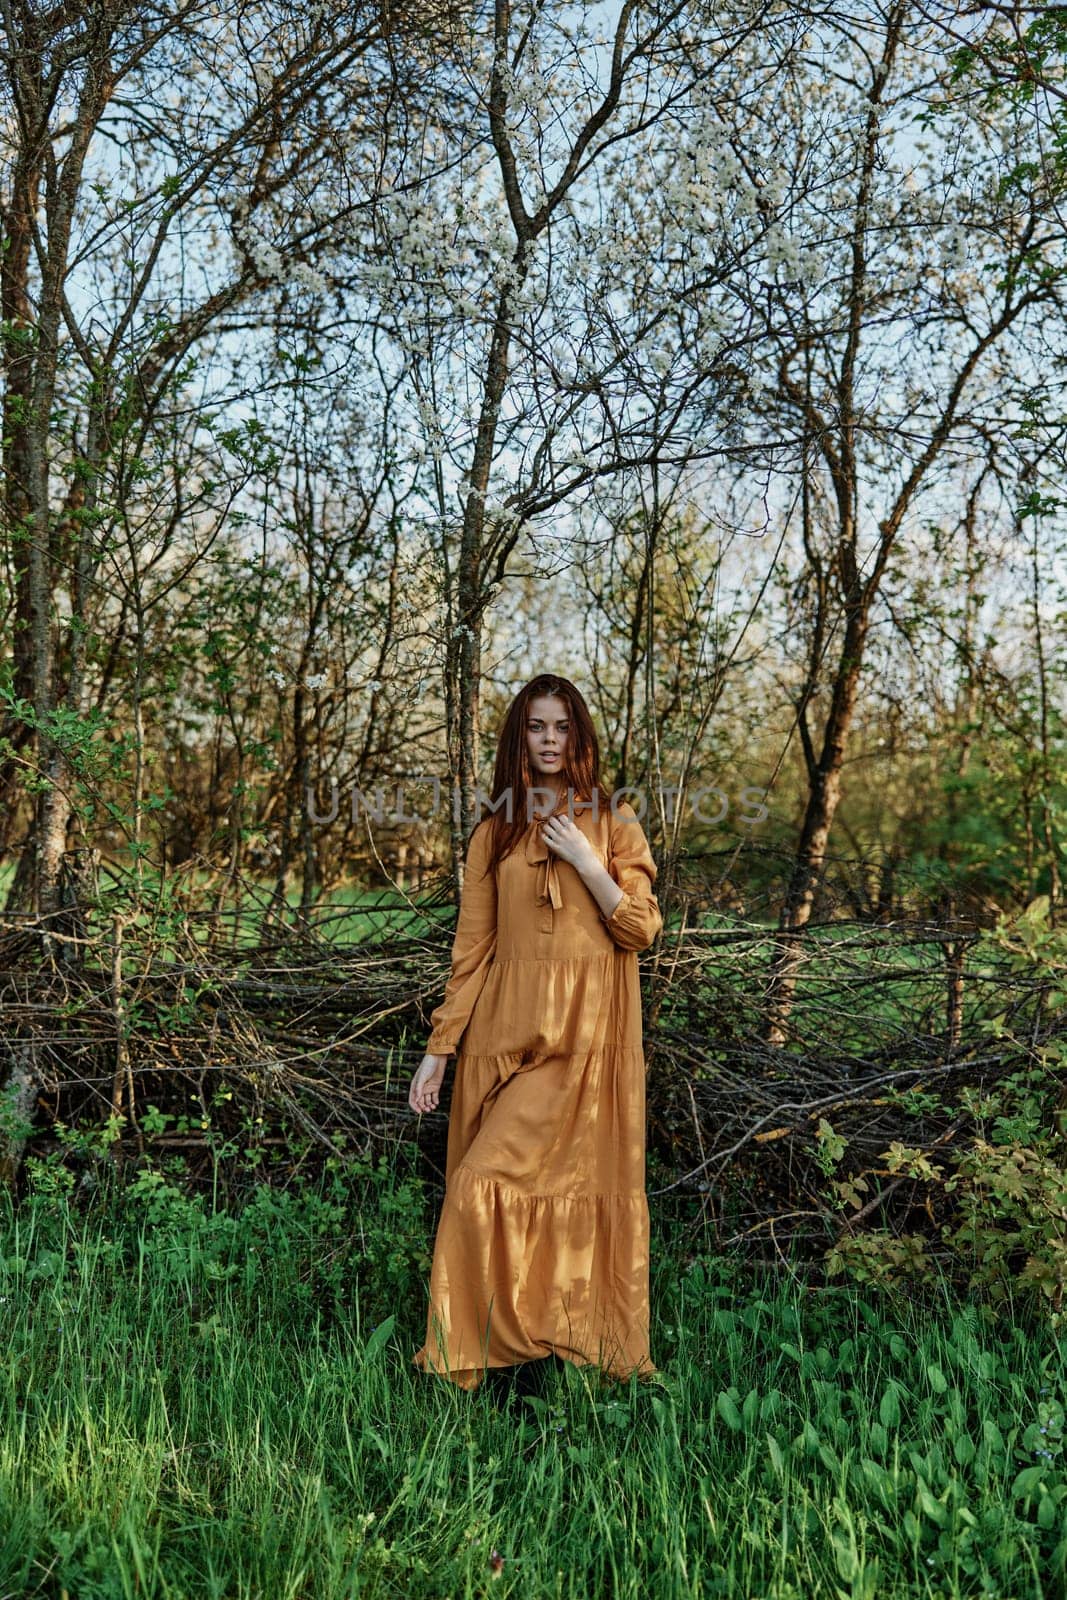 vertical photo of a beautiful, elegant woman in a stylish orange dress standing in the countryside in the shade of trees. High quality photo